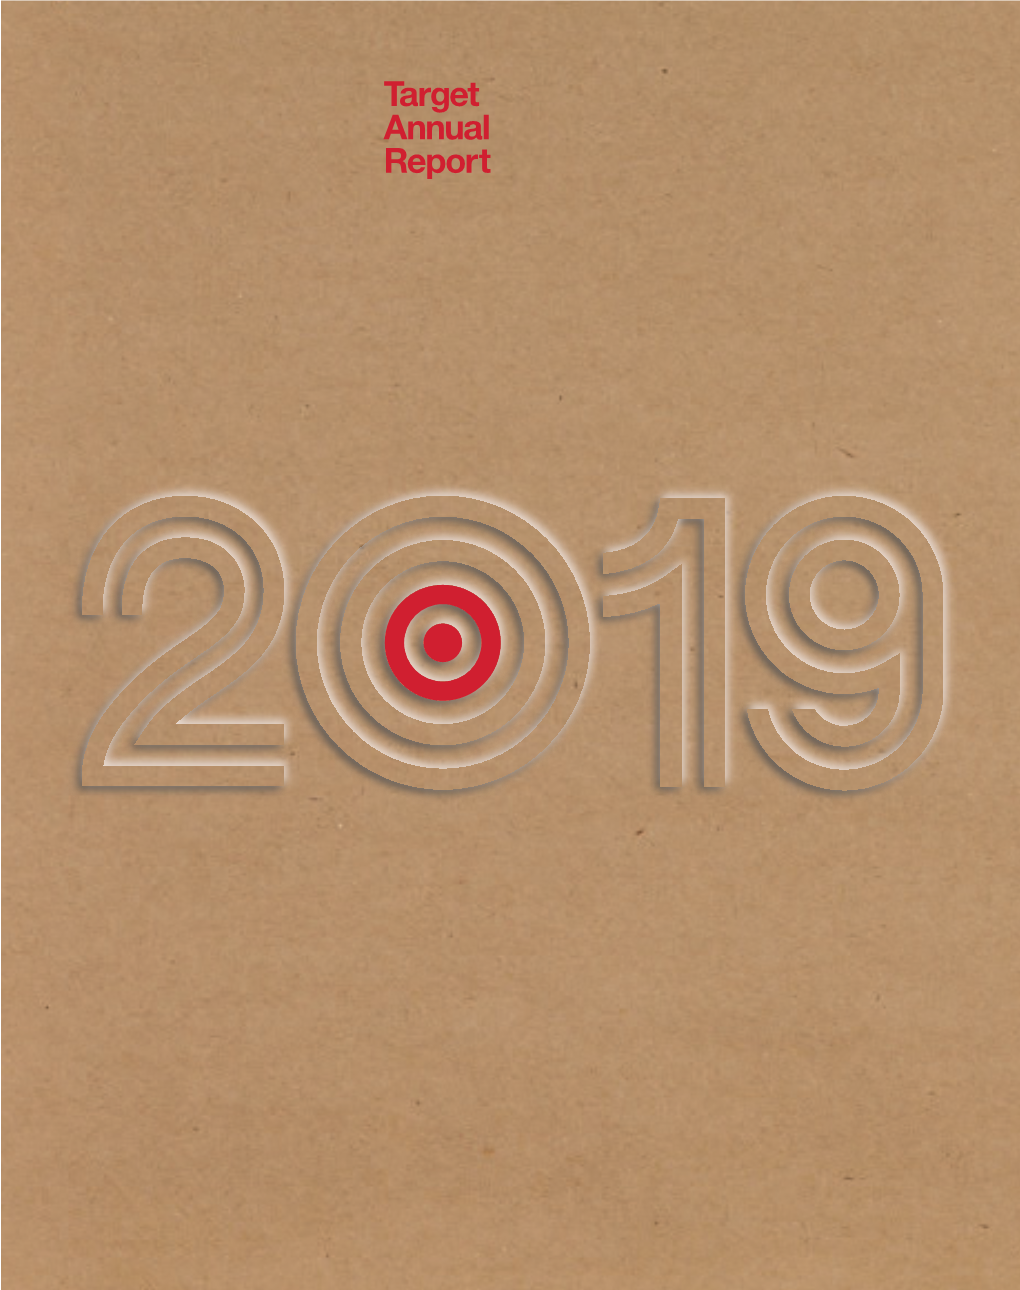 Target Annual Report to Explore Key Stories of the Past Welcome to Our Year and Find out What’S Ahead, Visit Target.Com/Abullseyeview